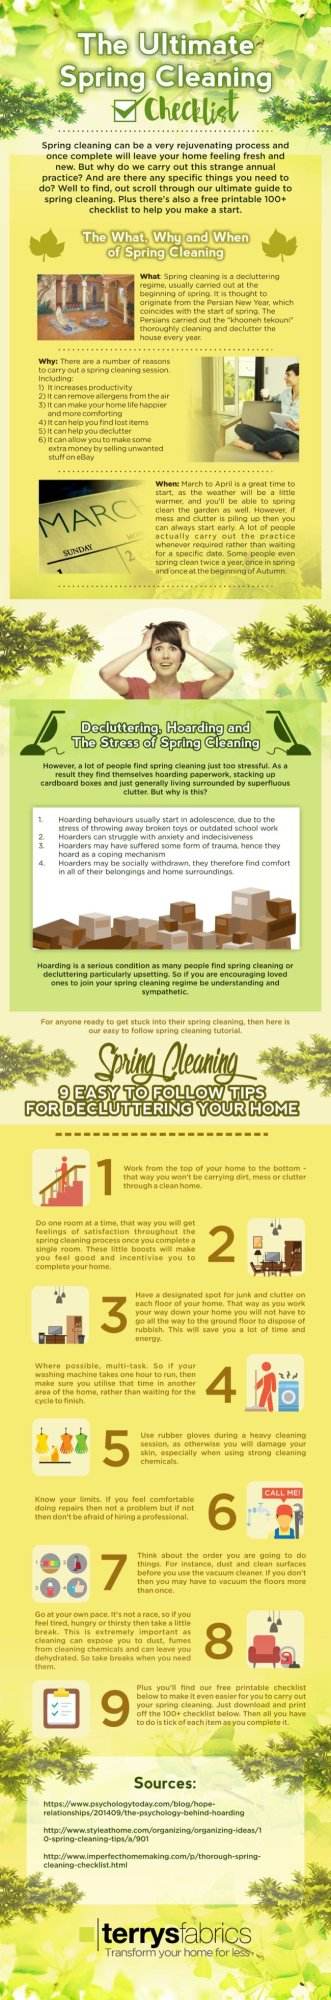 Spring Cleaning & Declutter Infographic for your house or condo spring cleaning